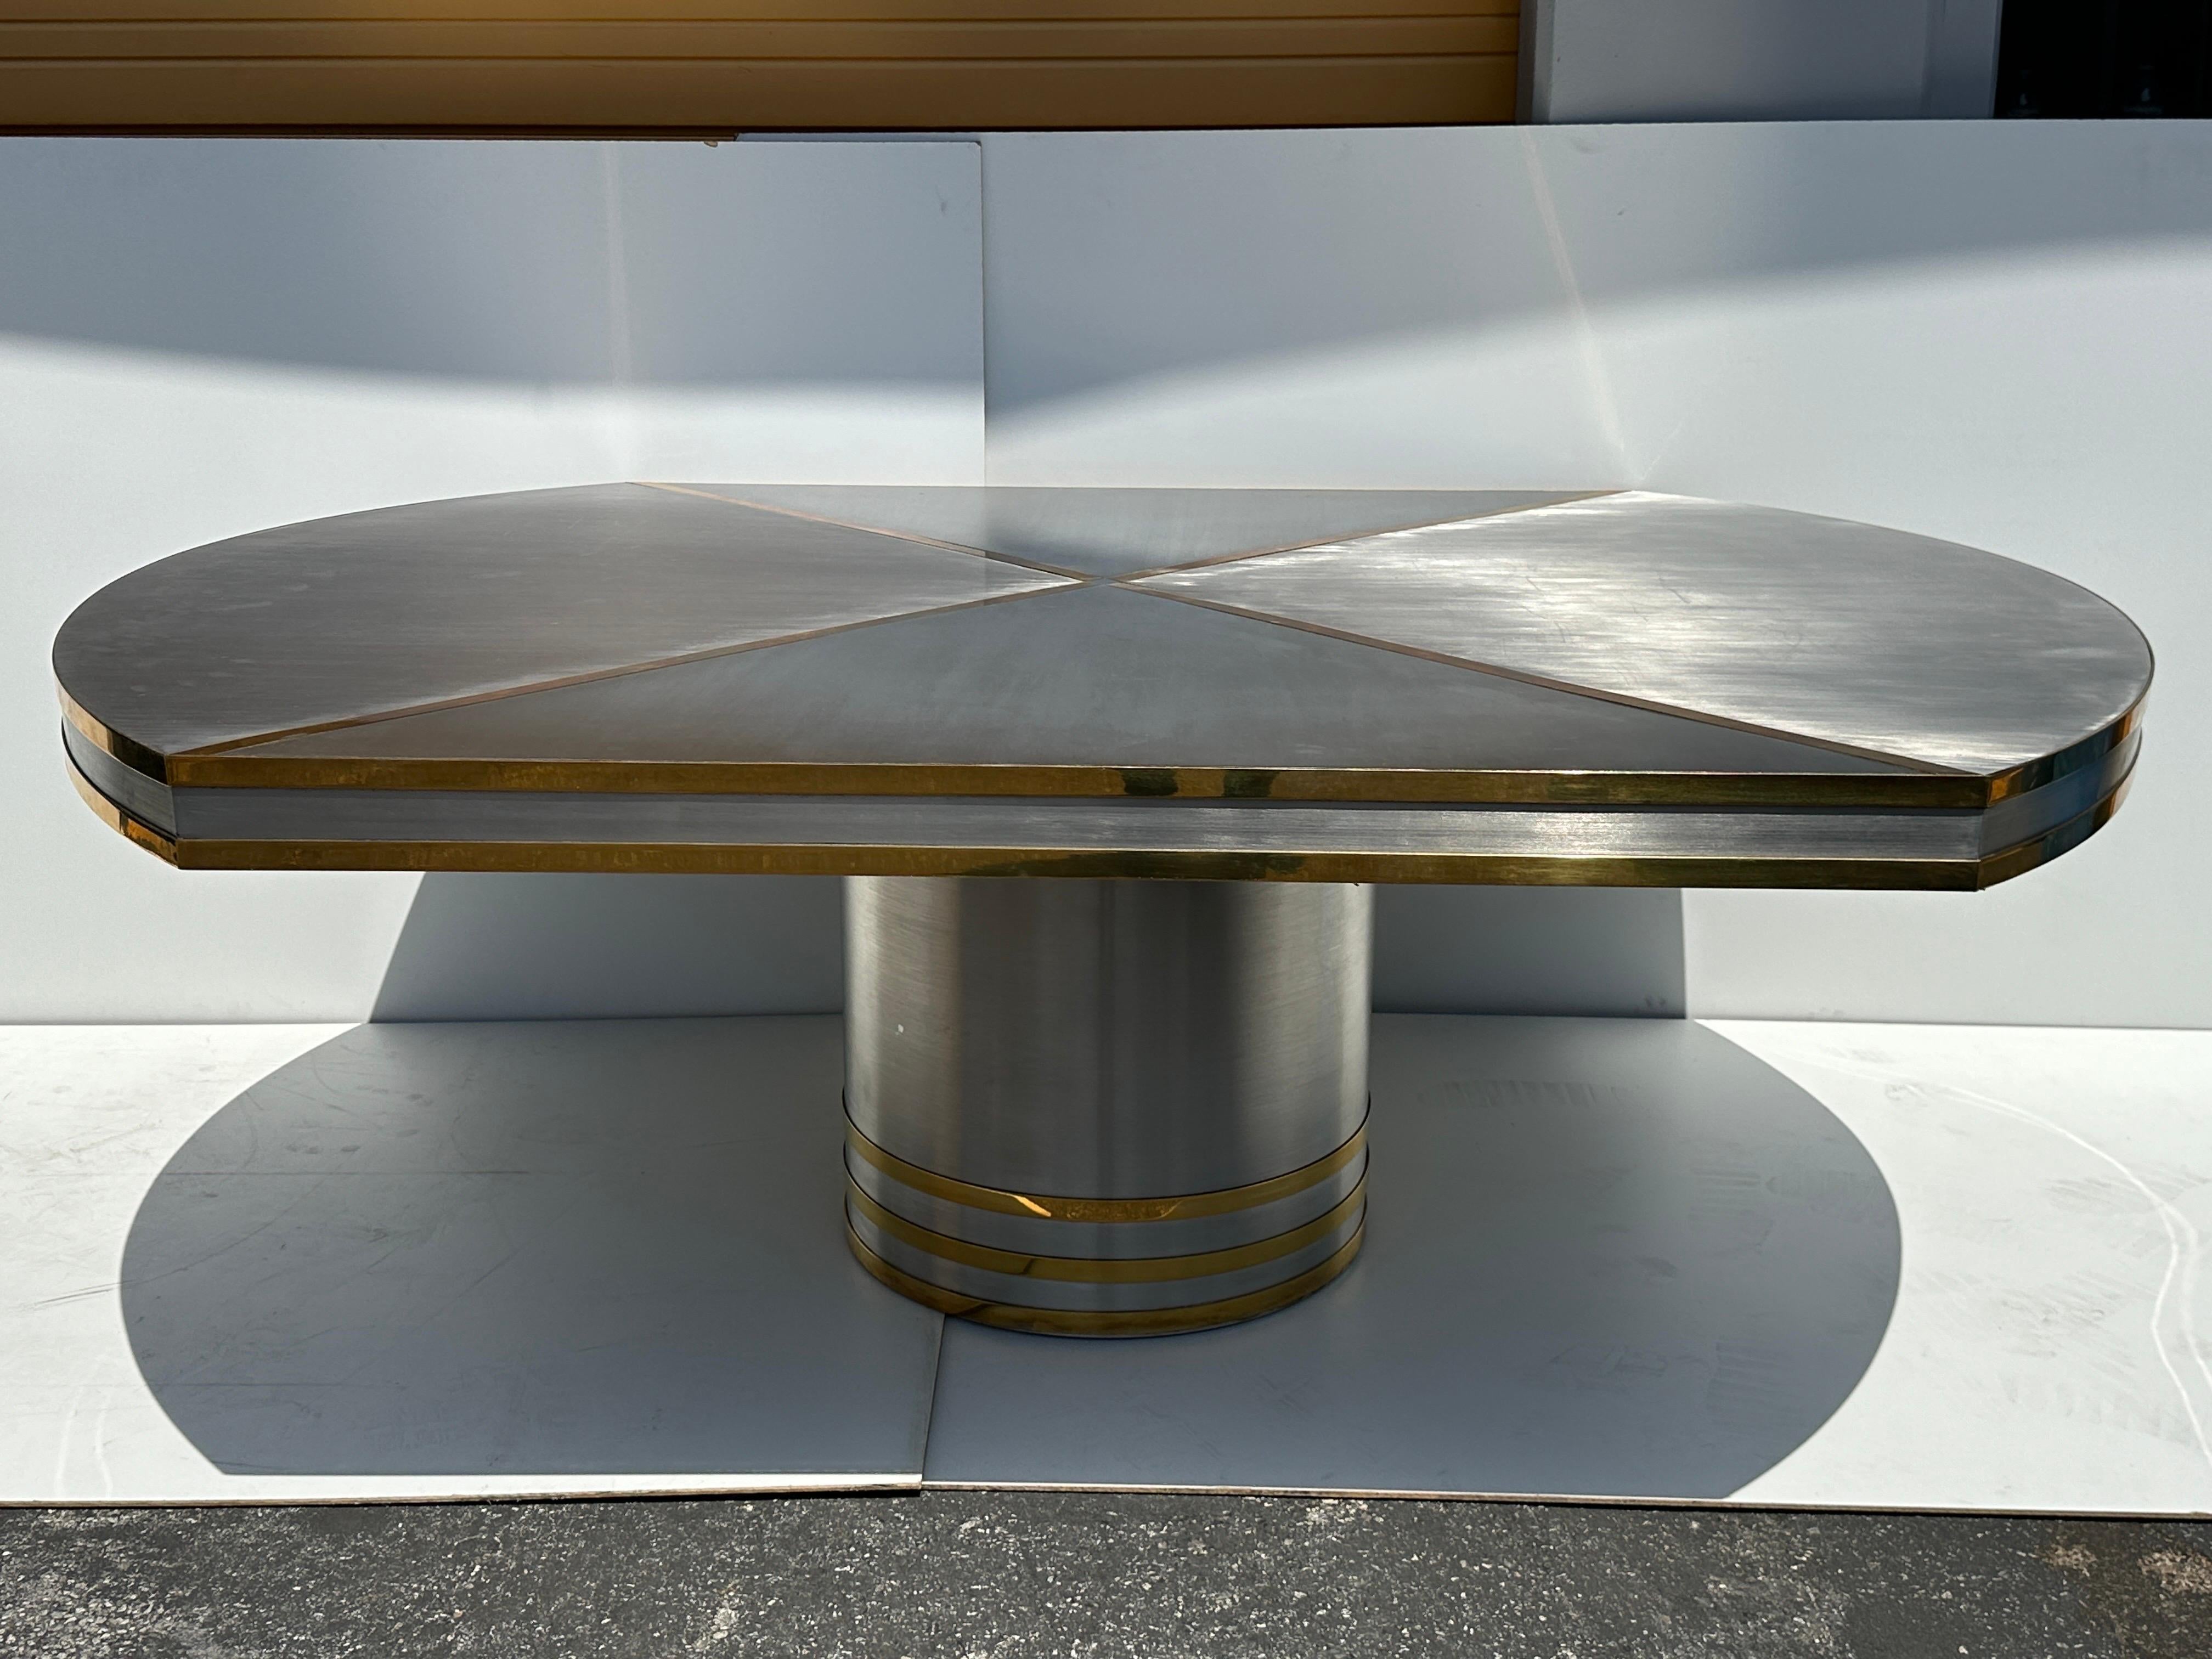 Brushed stainless steel and brass dining table attributed to Karl Springer or John Vesey.
Table top is set on a 24” diameter base with gilt brass stripes. This table is really glamorous, it is really hard to capture real beauty on camera.